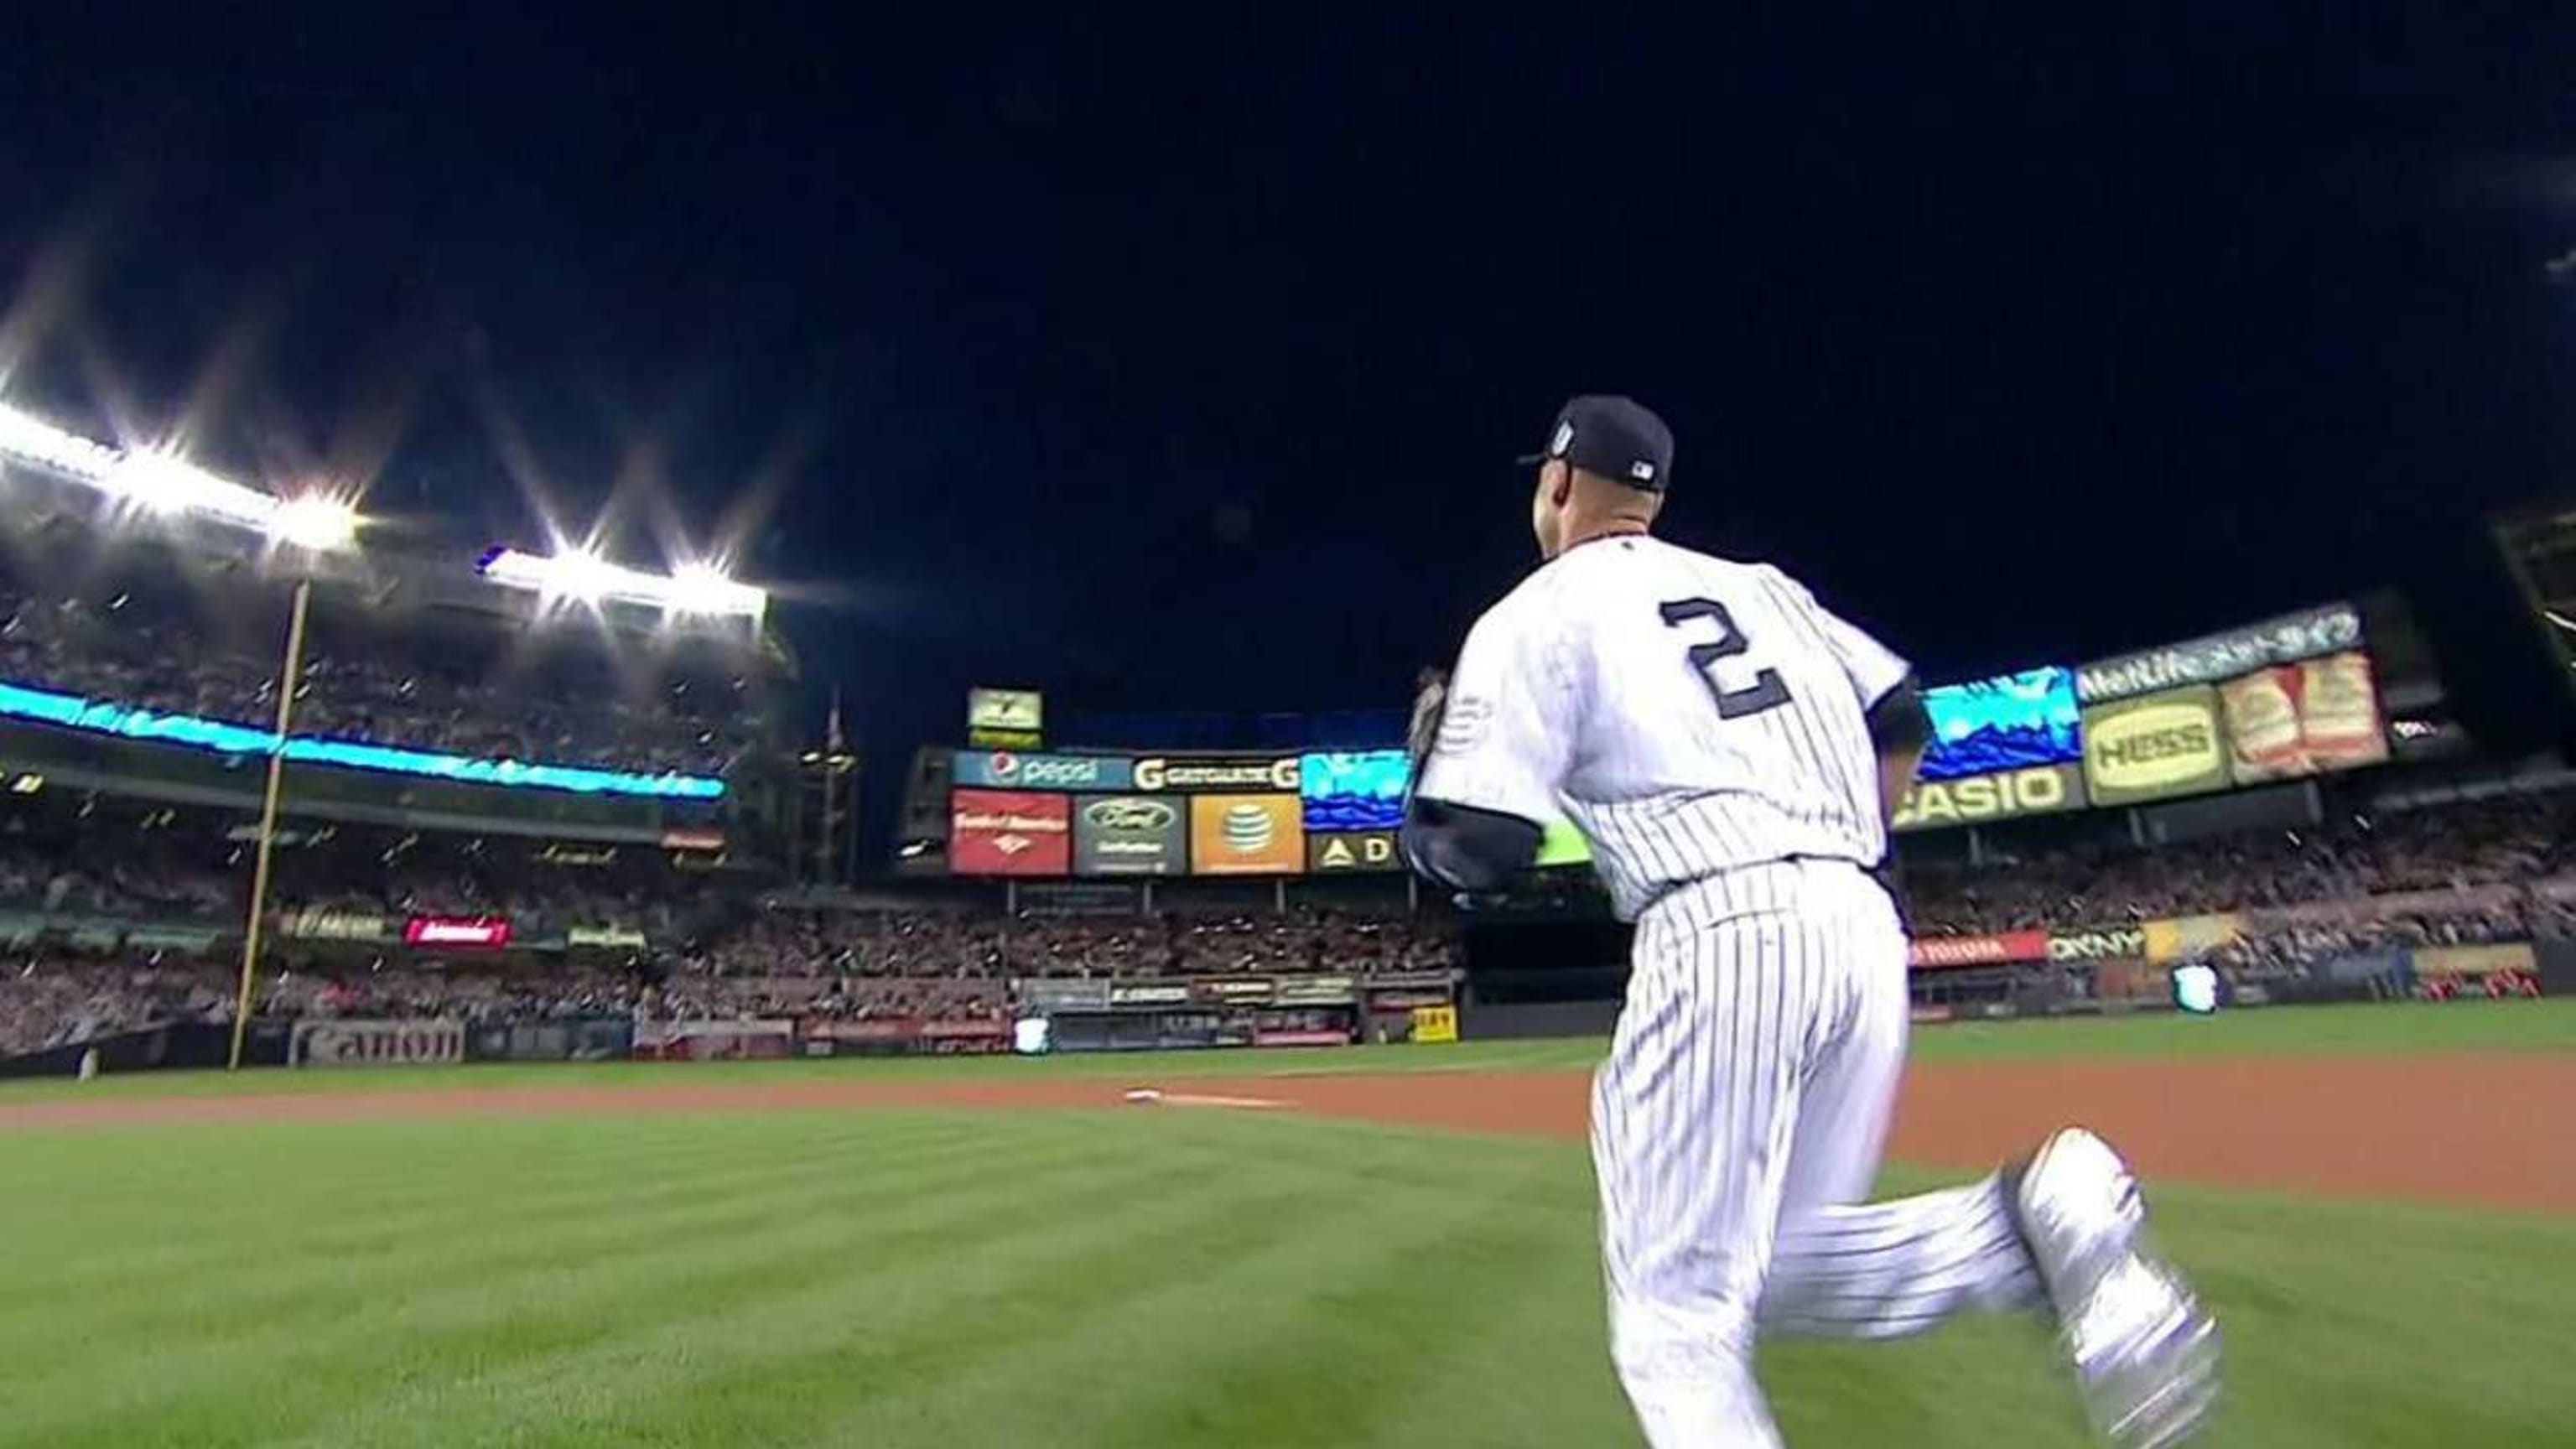 Jeter caps final game at Yankee Stadium with walk-off single – The Mercury  News